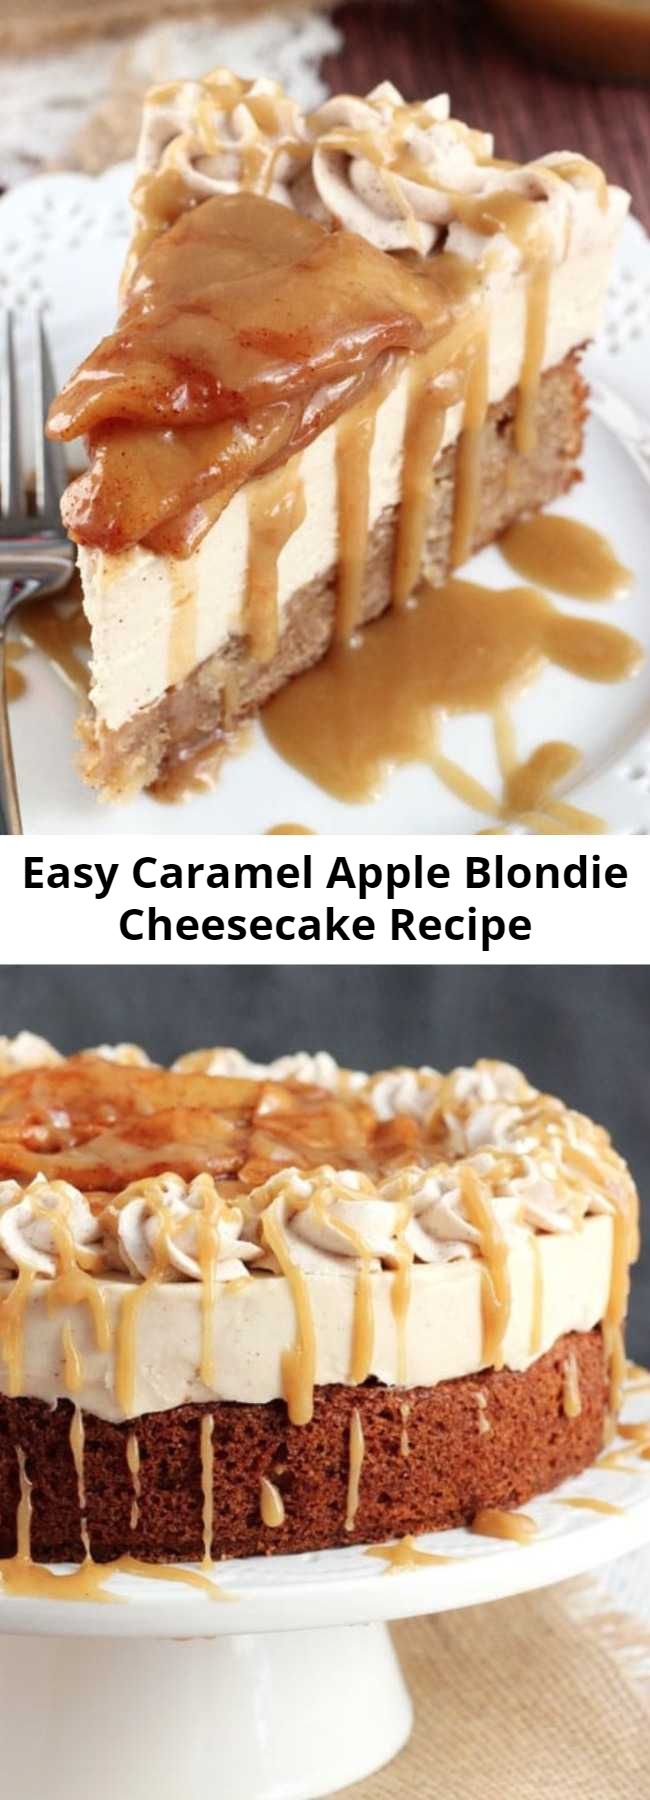 Easy Caramel Apple Blondie Cheesecake Recipe - This Caramel Apple Blondie Cheesecake is pure caramel apple heaven, I kid you not. It has layers of apple spice blondie and no-bake caramel cheesecake, and it’s topped with cinnamon apples and caramel sauce!